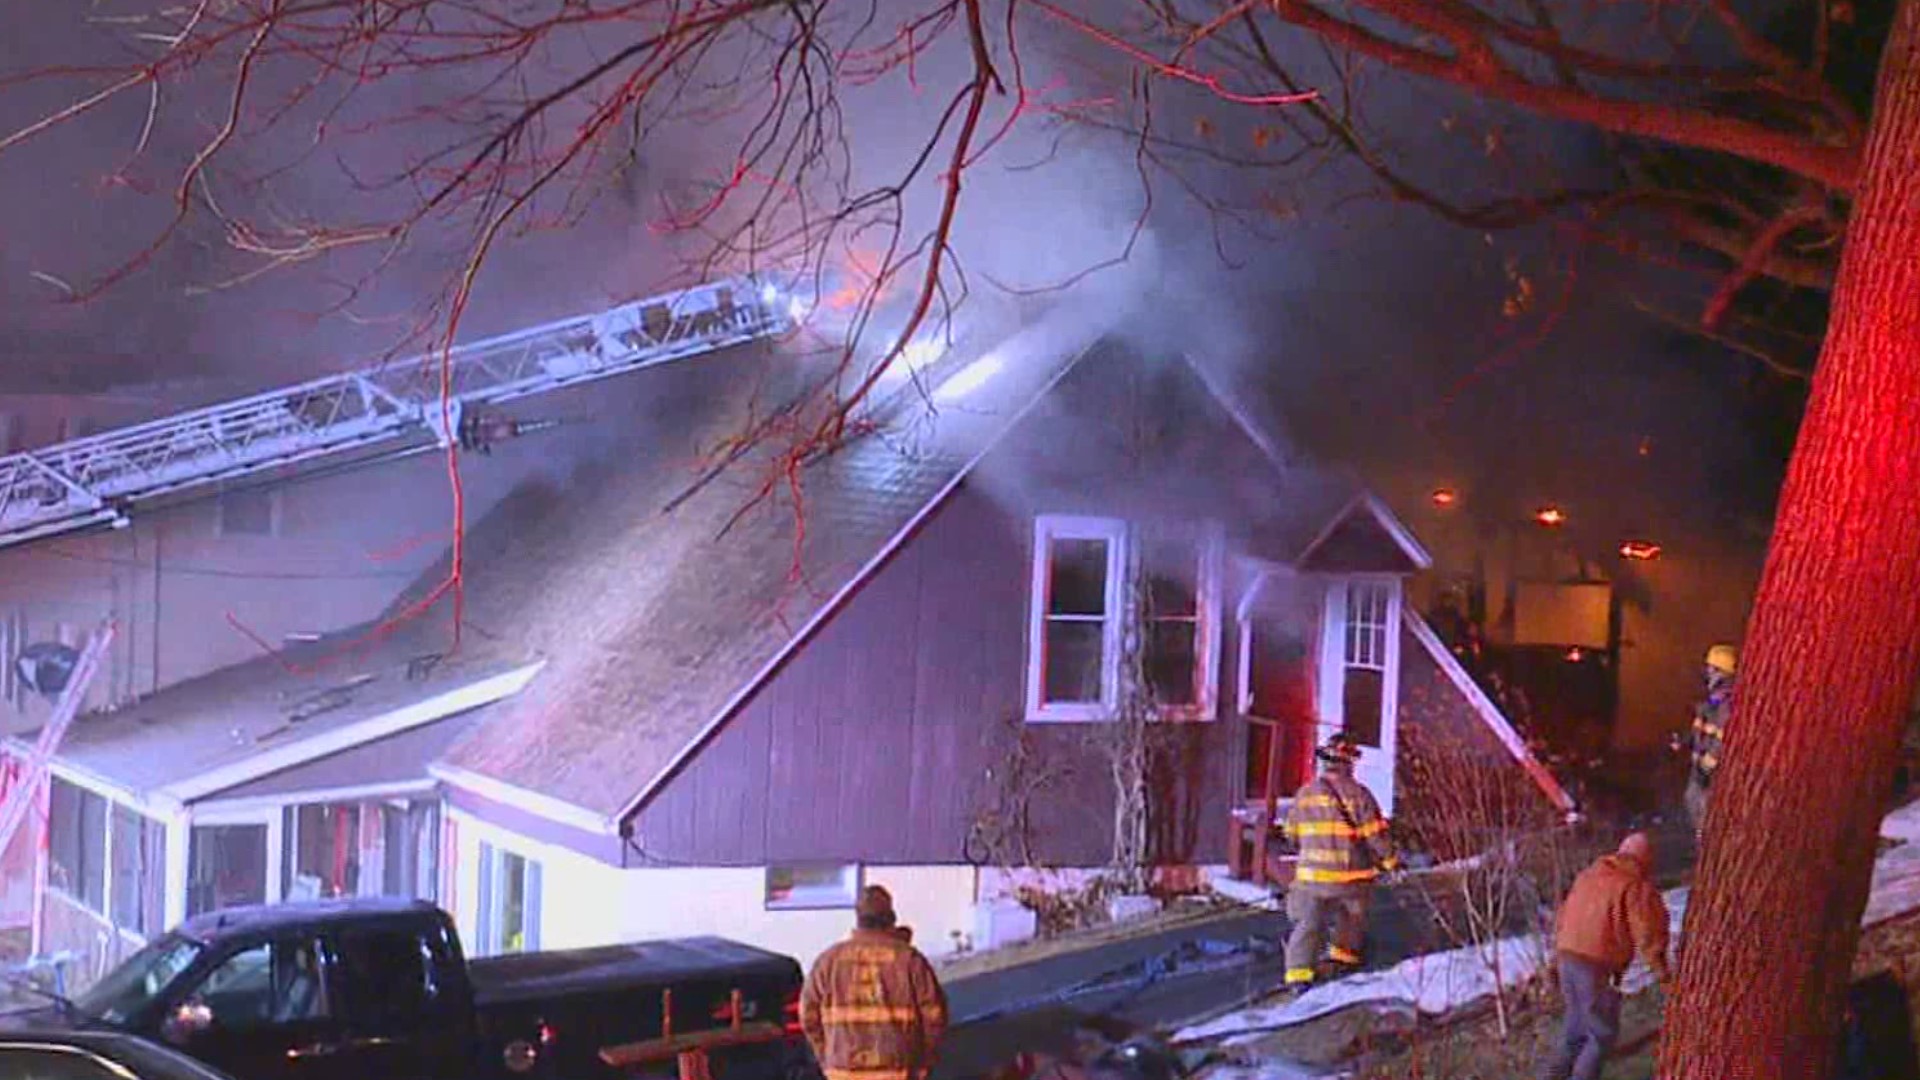 Two people forced from their home after a fire early Wednesday morning in Luzerne County.